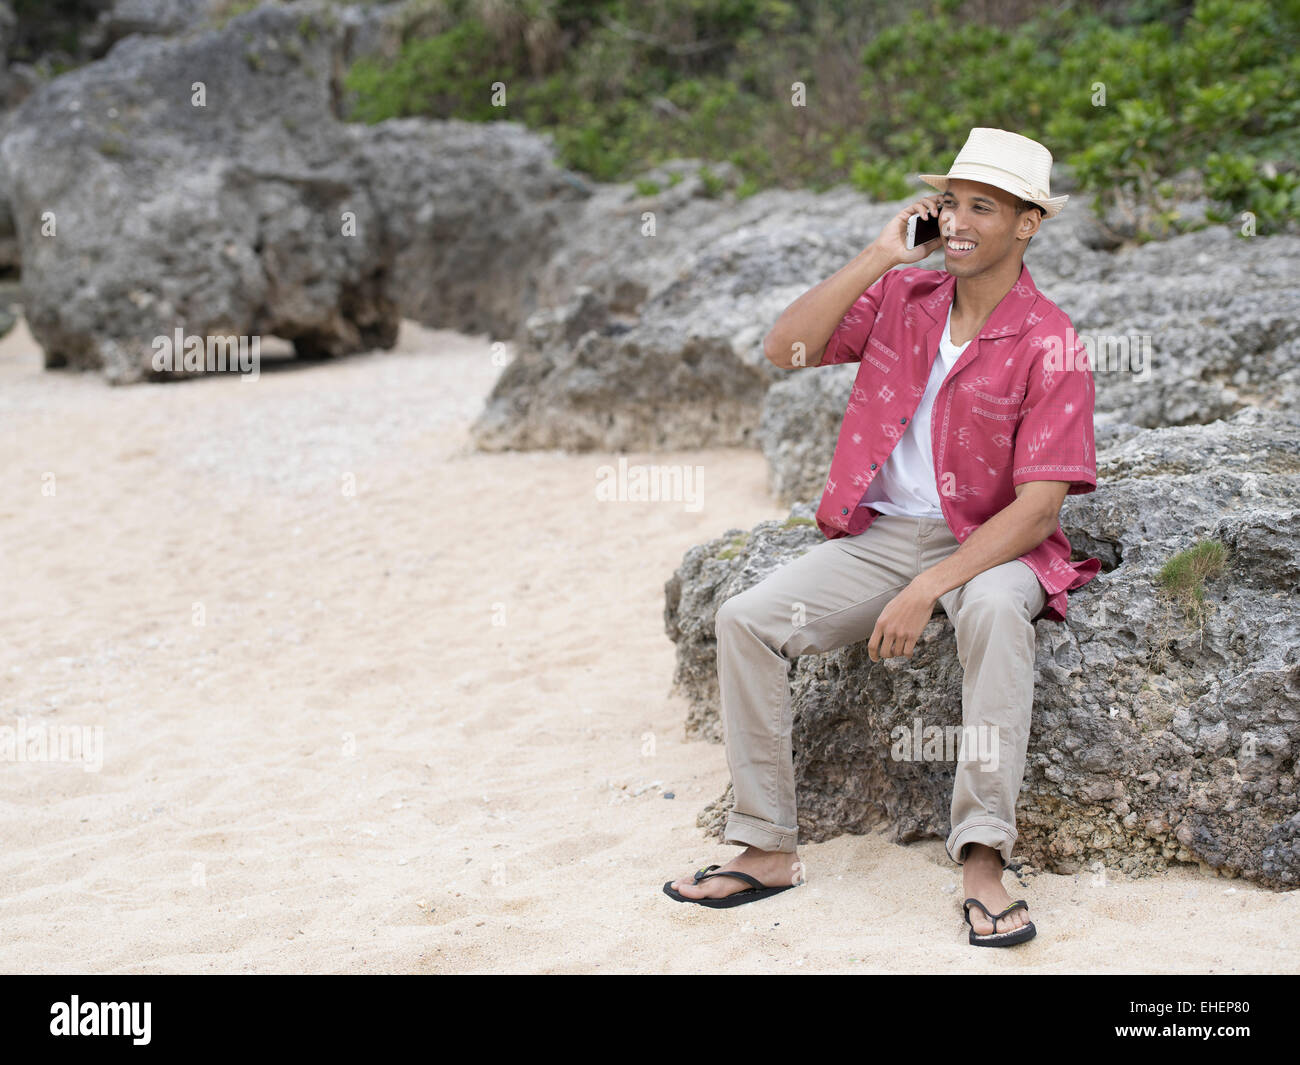 Man calling / telephoning with Apple iphone 6 smartphone while at the beach Stock Photo